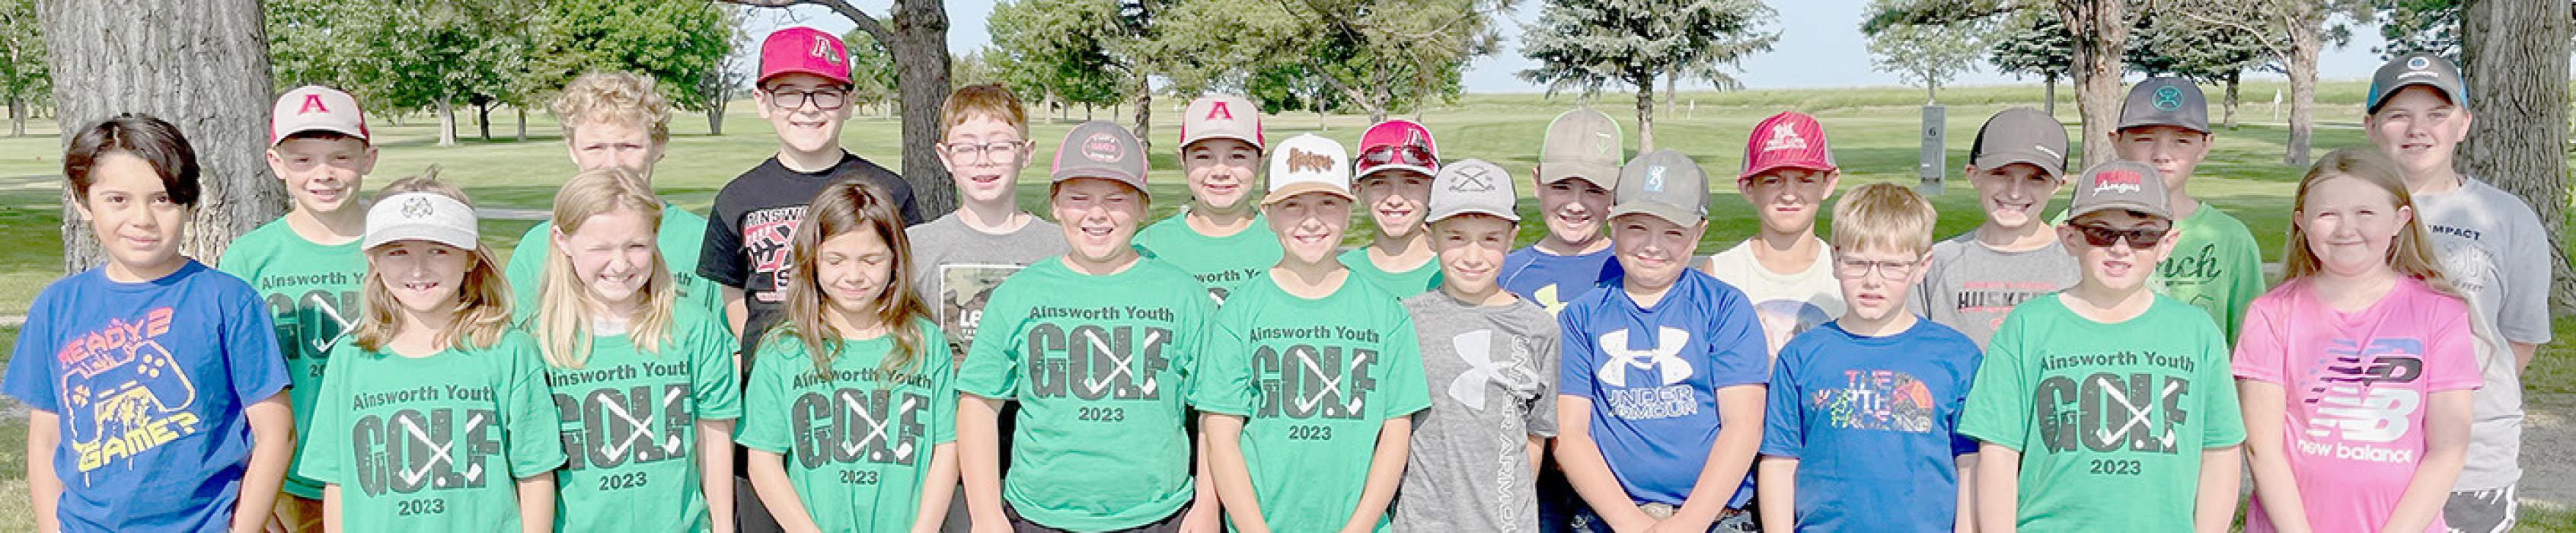 The 2023 Ainsworth Youth Group included Third and Fourth Graders which were (Front Row - Left to Right) Diego Godoy, Logan Johnson, Gracie Gillespie, Bella Pike, Ava Barthel, Emersyn Hasenohr, Tristan Sedlacek, Owen King, Tripp Hallock, Barrett Alberts and Sophia Schroedel; and (Back Row - Left to Right): Mason Winters, Vaden Pike, Leighton Konkoleski, Mason Shepperd, Adeline Hladky, Max Hasenohr, J.W. King, Dash Rathe, Tygan Sisson, Trypp Schmitz and Kira Goochey.